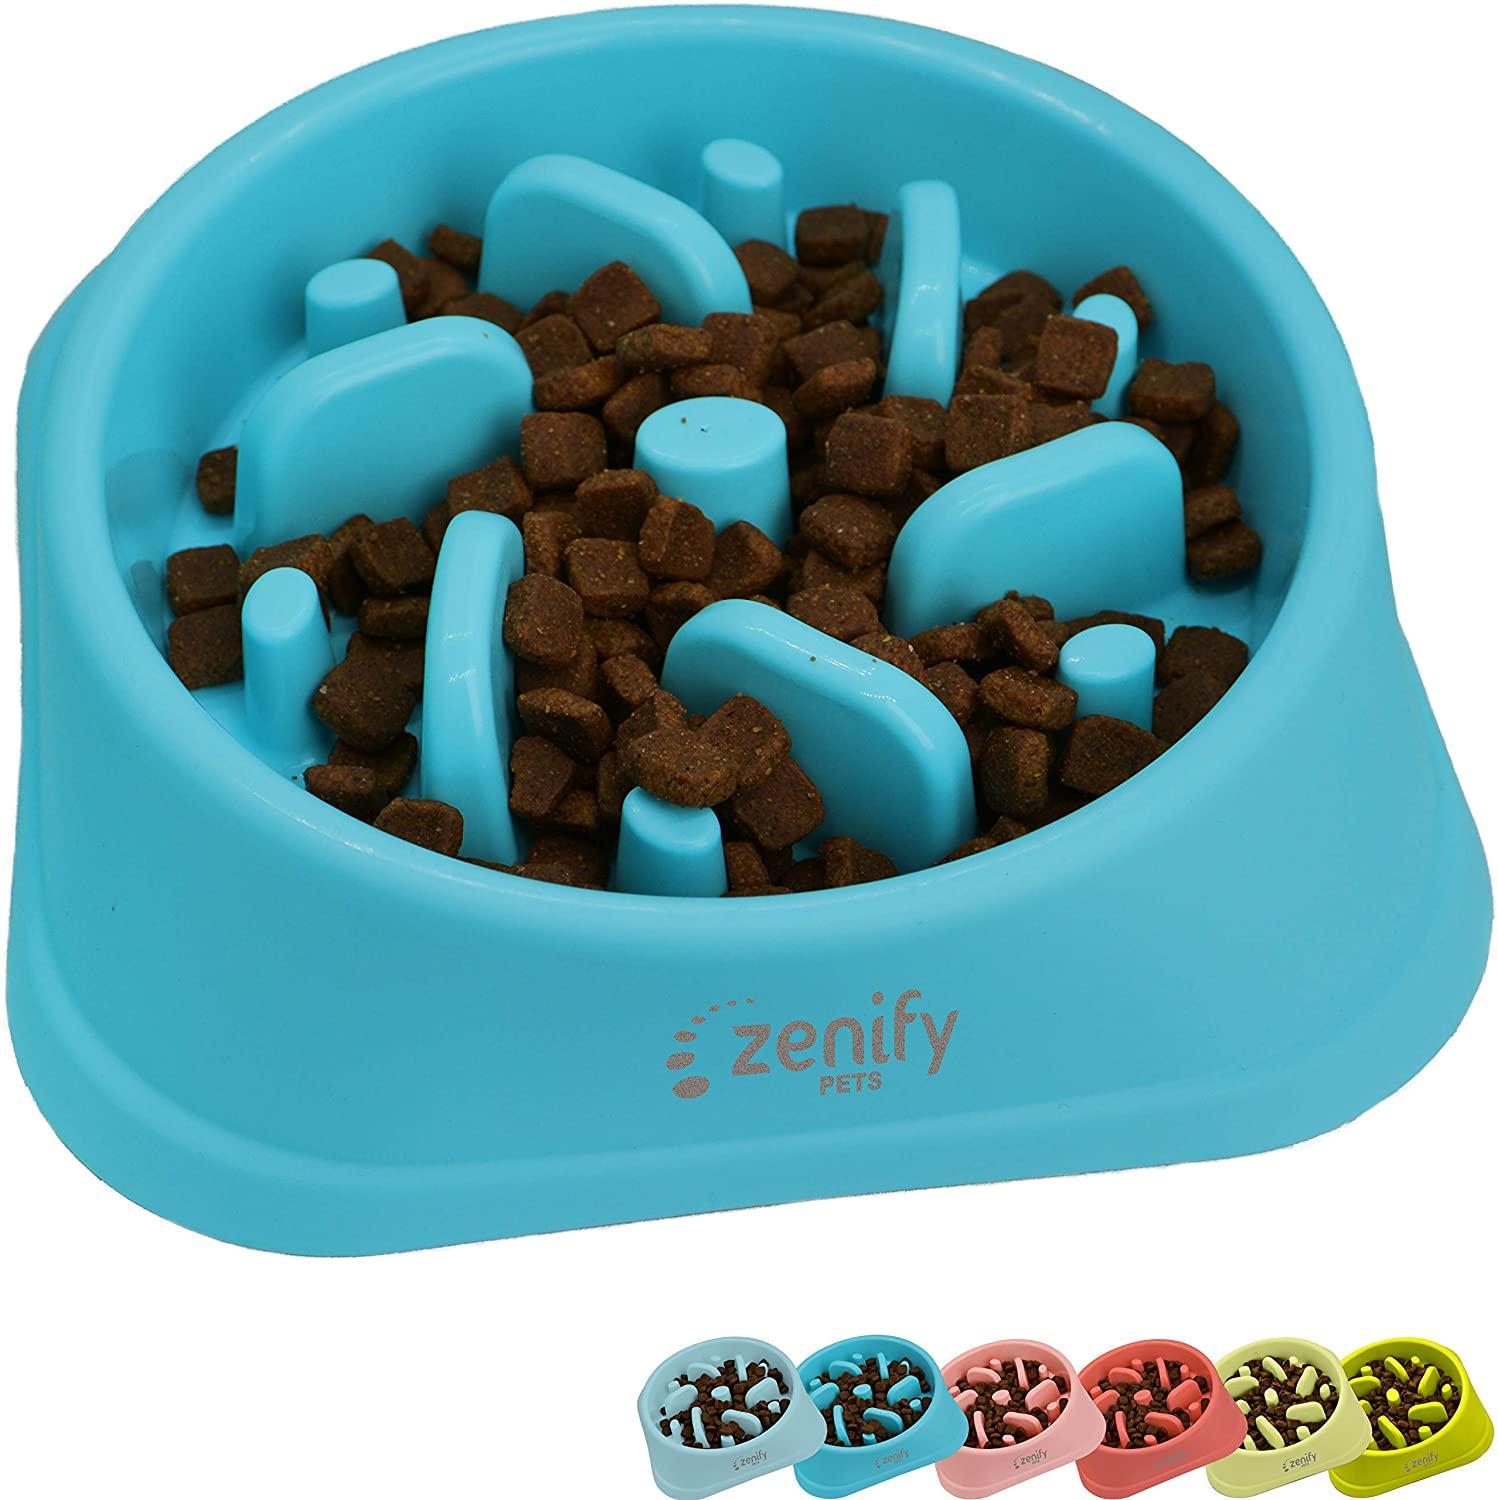 Zenify Dog Bowl Slow Feeder Large 500ml Healthy Eating Pet Interactive Feeder with Anti Skid Non Slip Grip Base to Reduce Overeating Bloating Vomiting Obesity for Wet Dry Raw Food and Water(Blue)